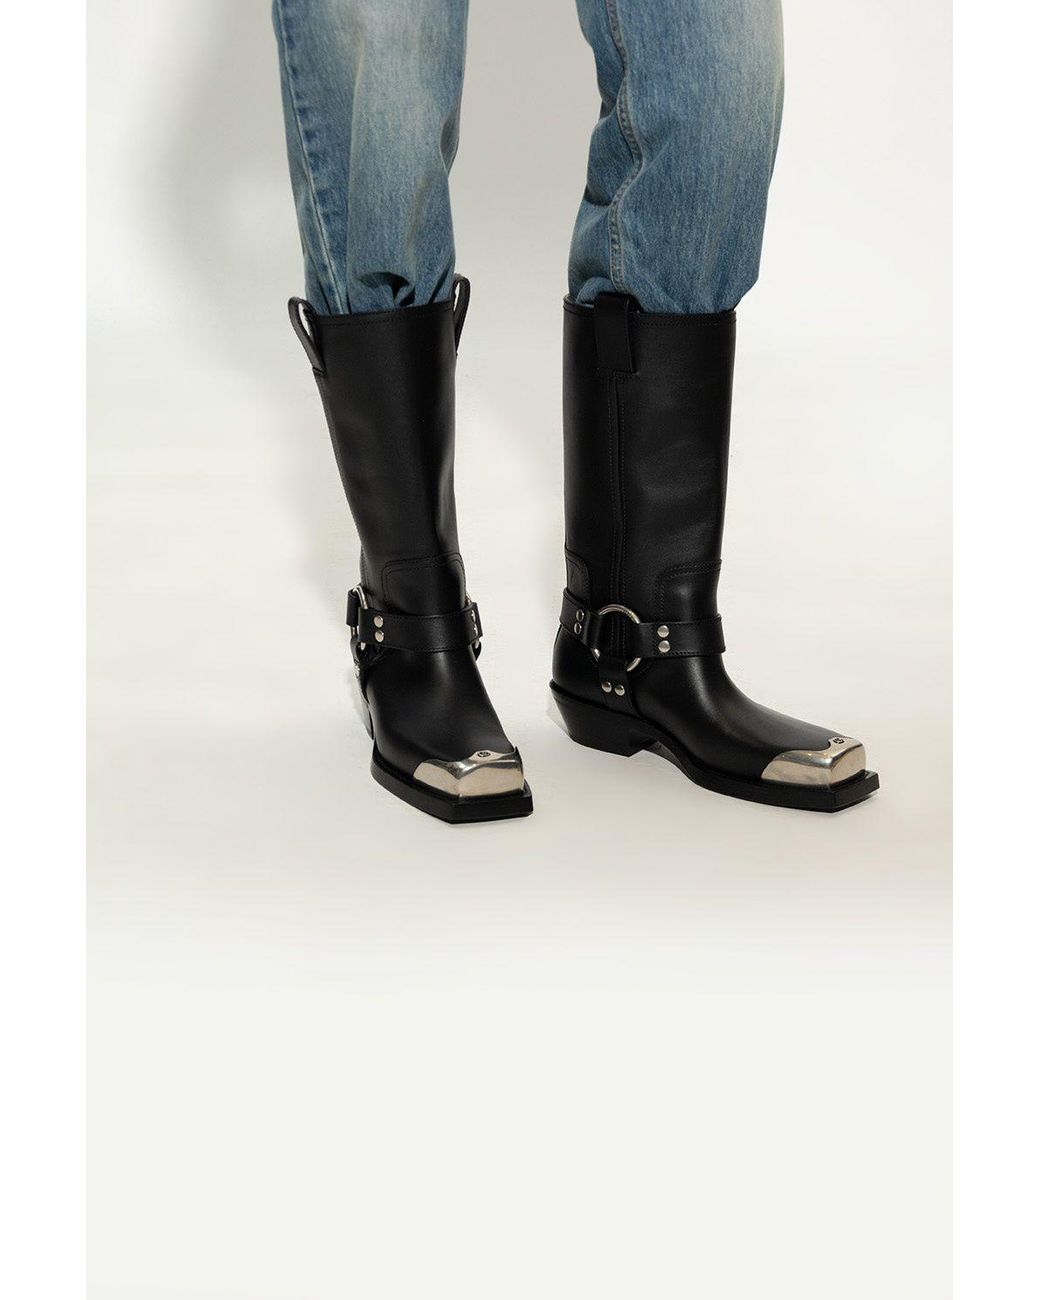 Gucci Opal Interlocking G Leather Cowboy Boots in Black for Men